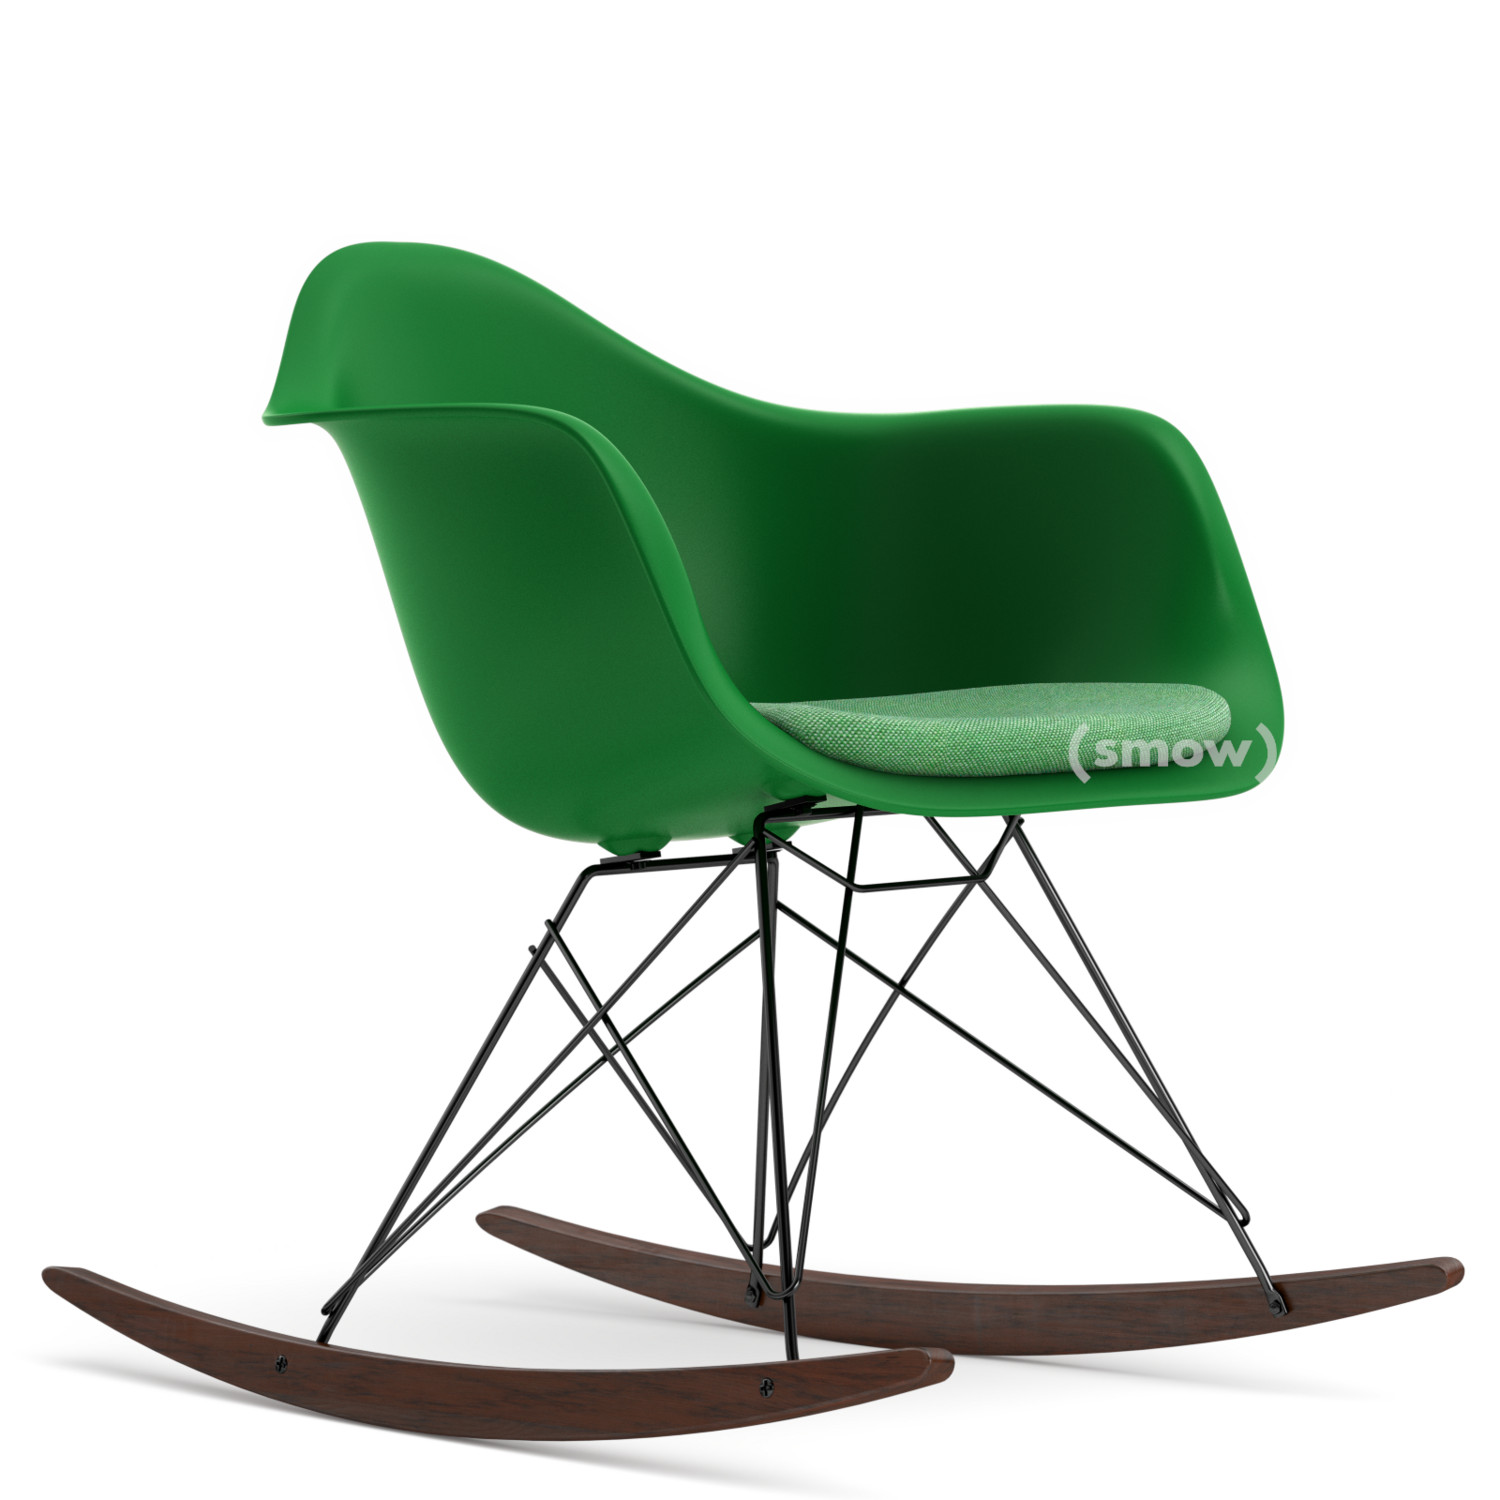 Vitra Rar With Upholstery Green With Seat Upholstery Green Ivory Without Border Welting Basic Dark Dark Maple By Charles Ray Eames 1950 Designer Furniture By Smow Com